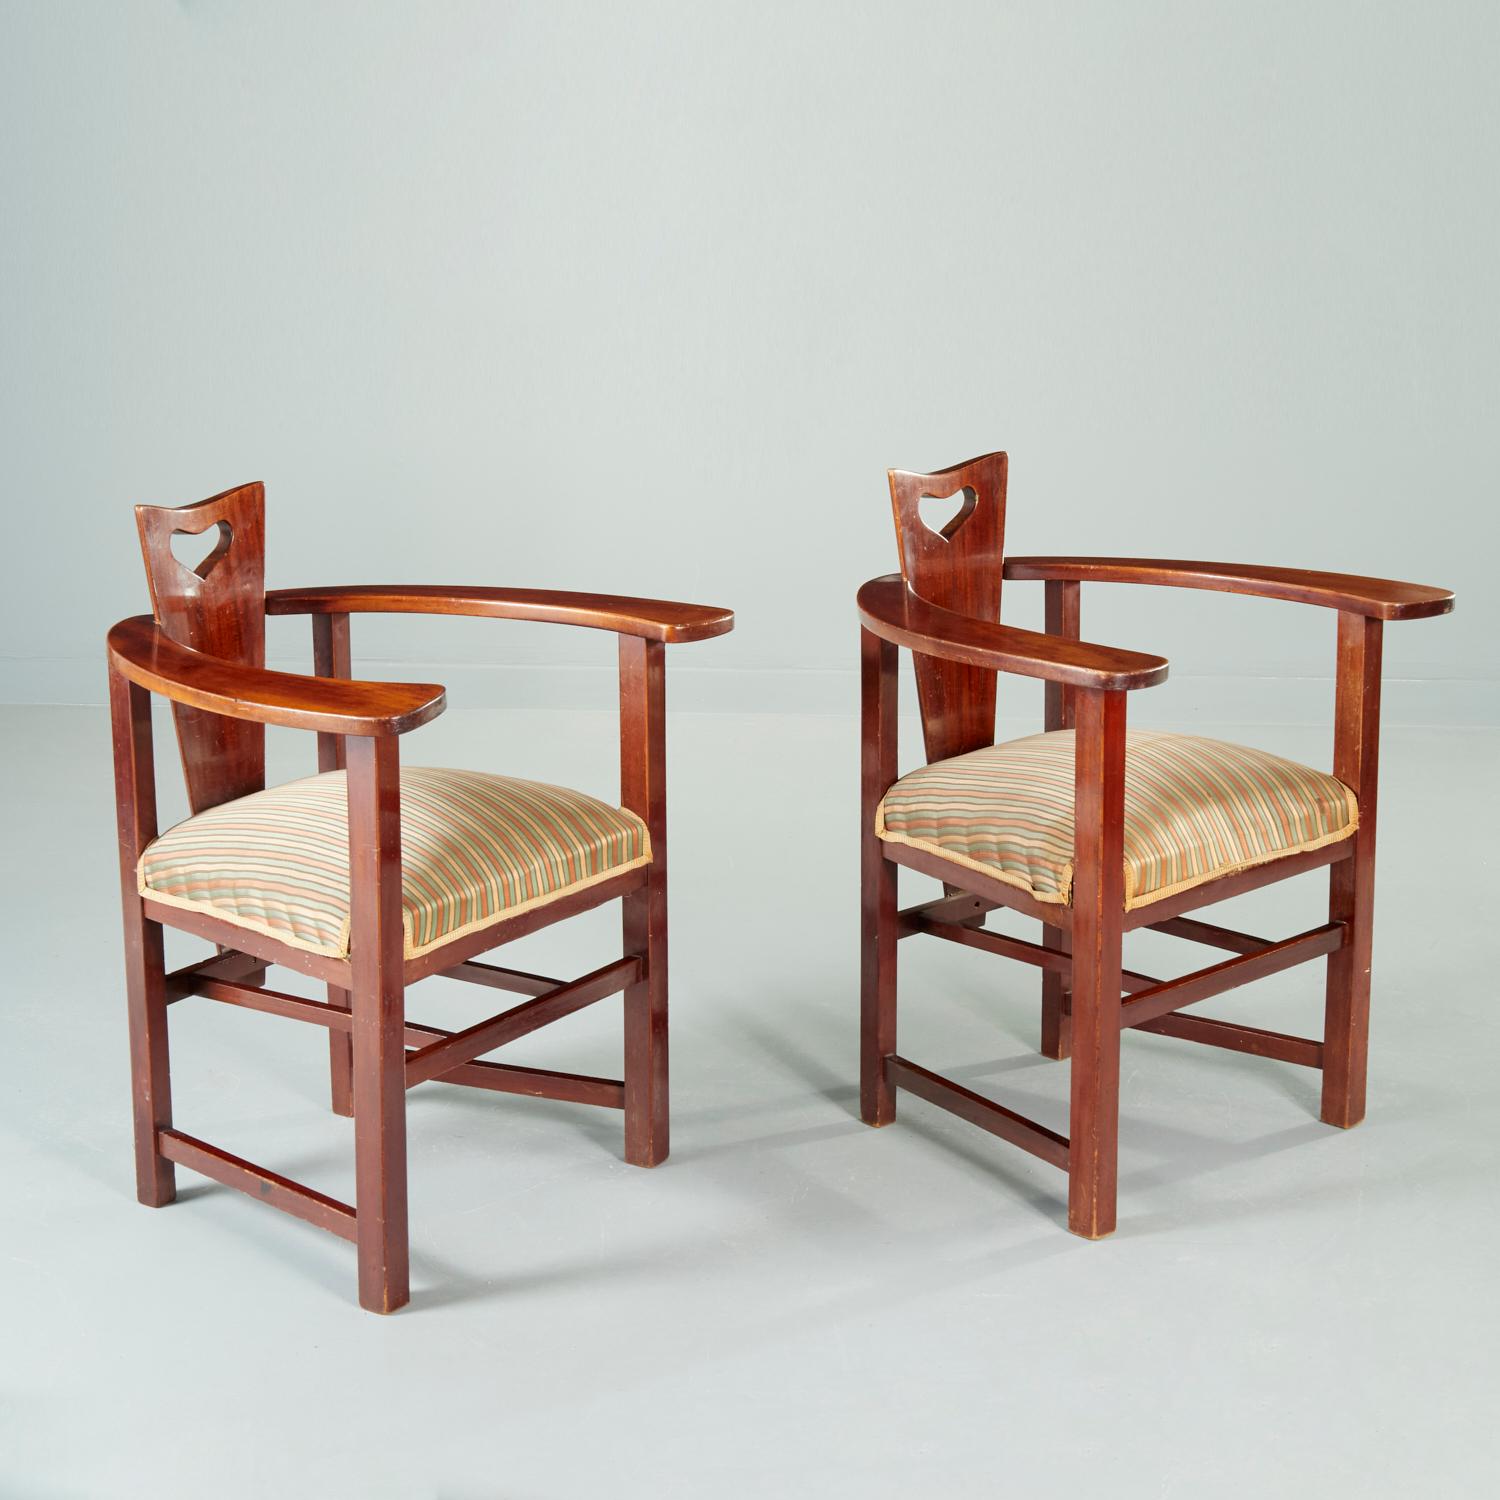 C. 1896, Scotland, mahogany, the triangular back with heart-shaped cutout handle, the wide horseshoe armrests raised on four square legs joined by stretchers, padded striped sage and peach silk seat, unmarked. An iconic design from the Glasgow